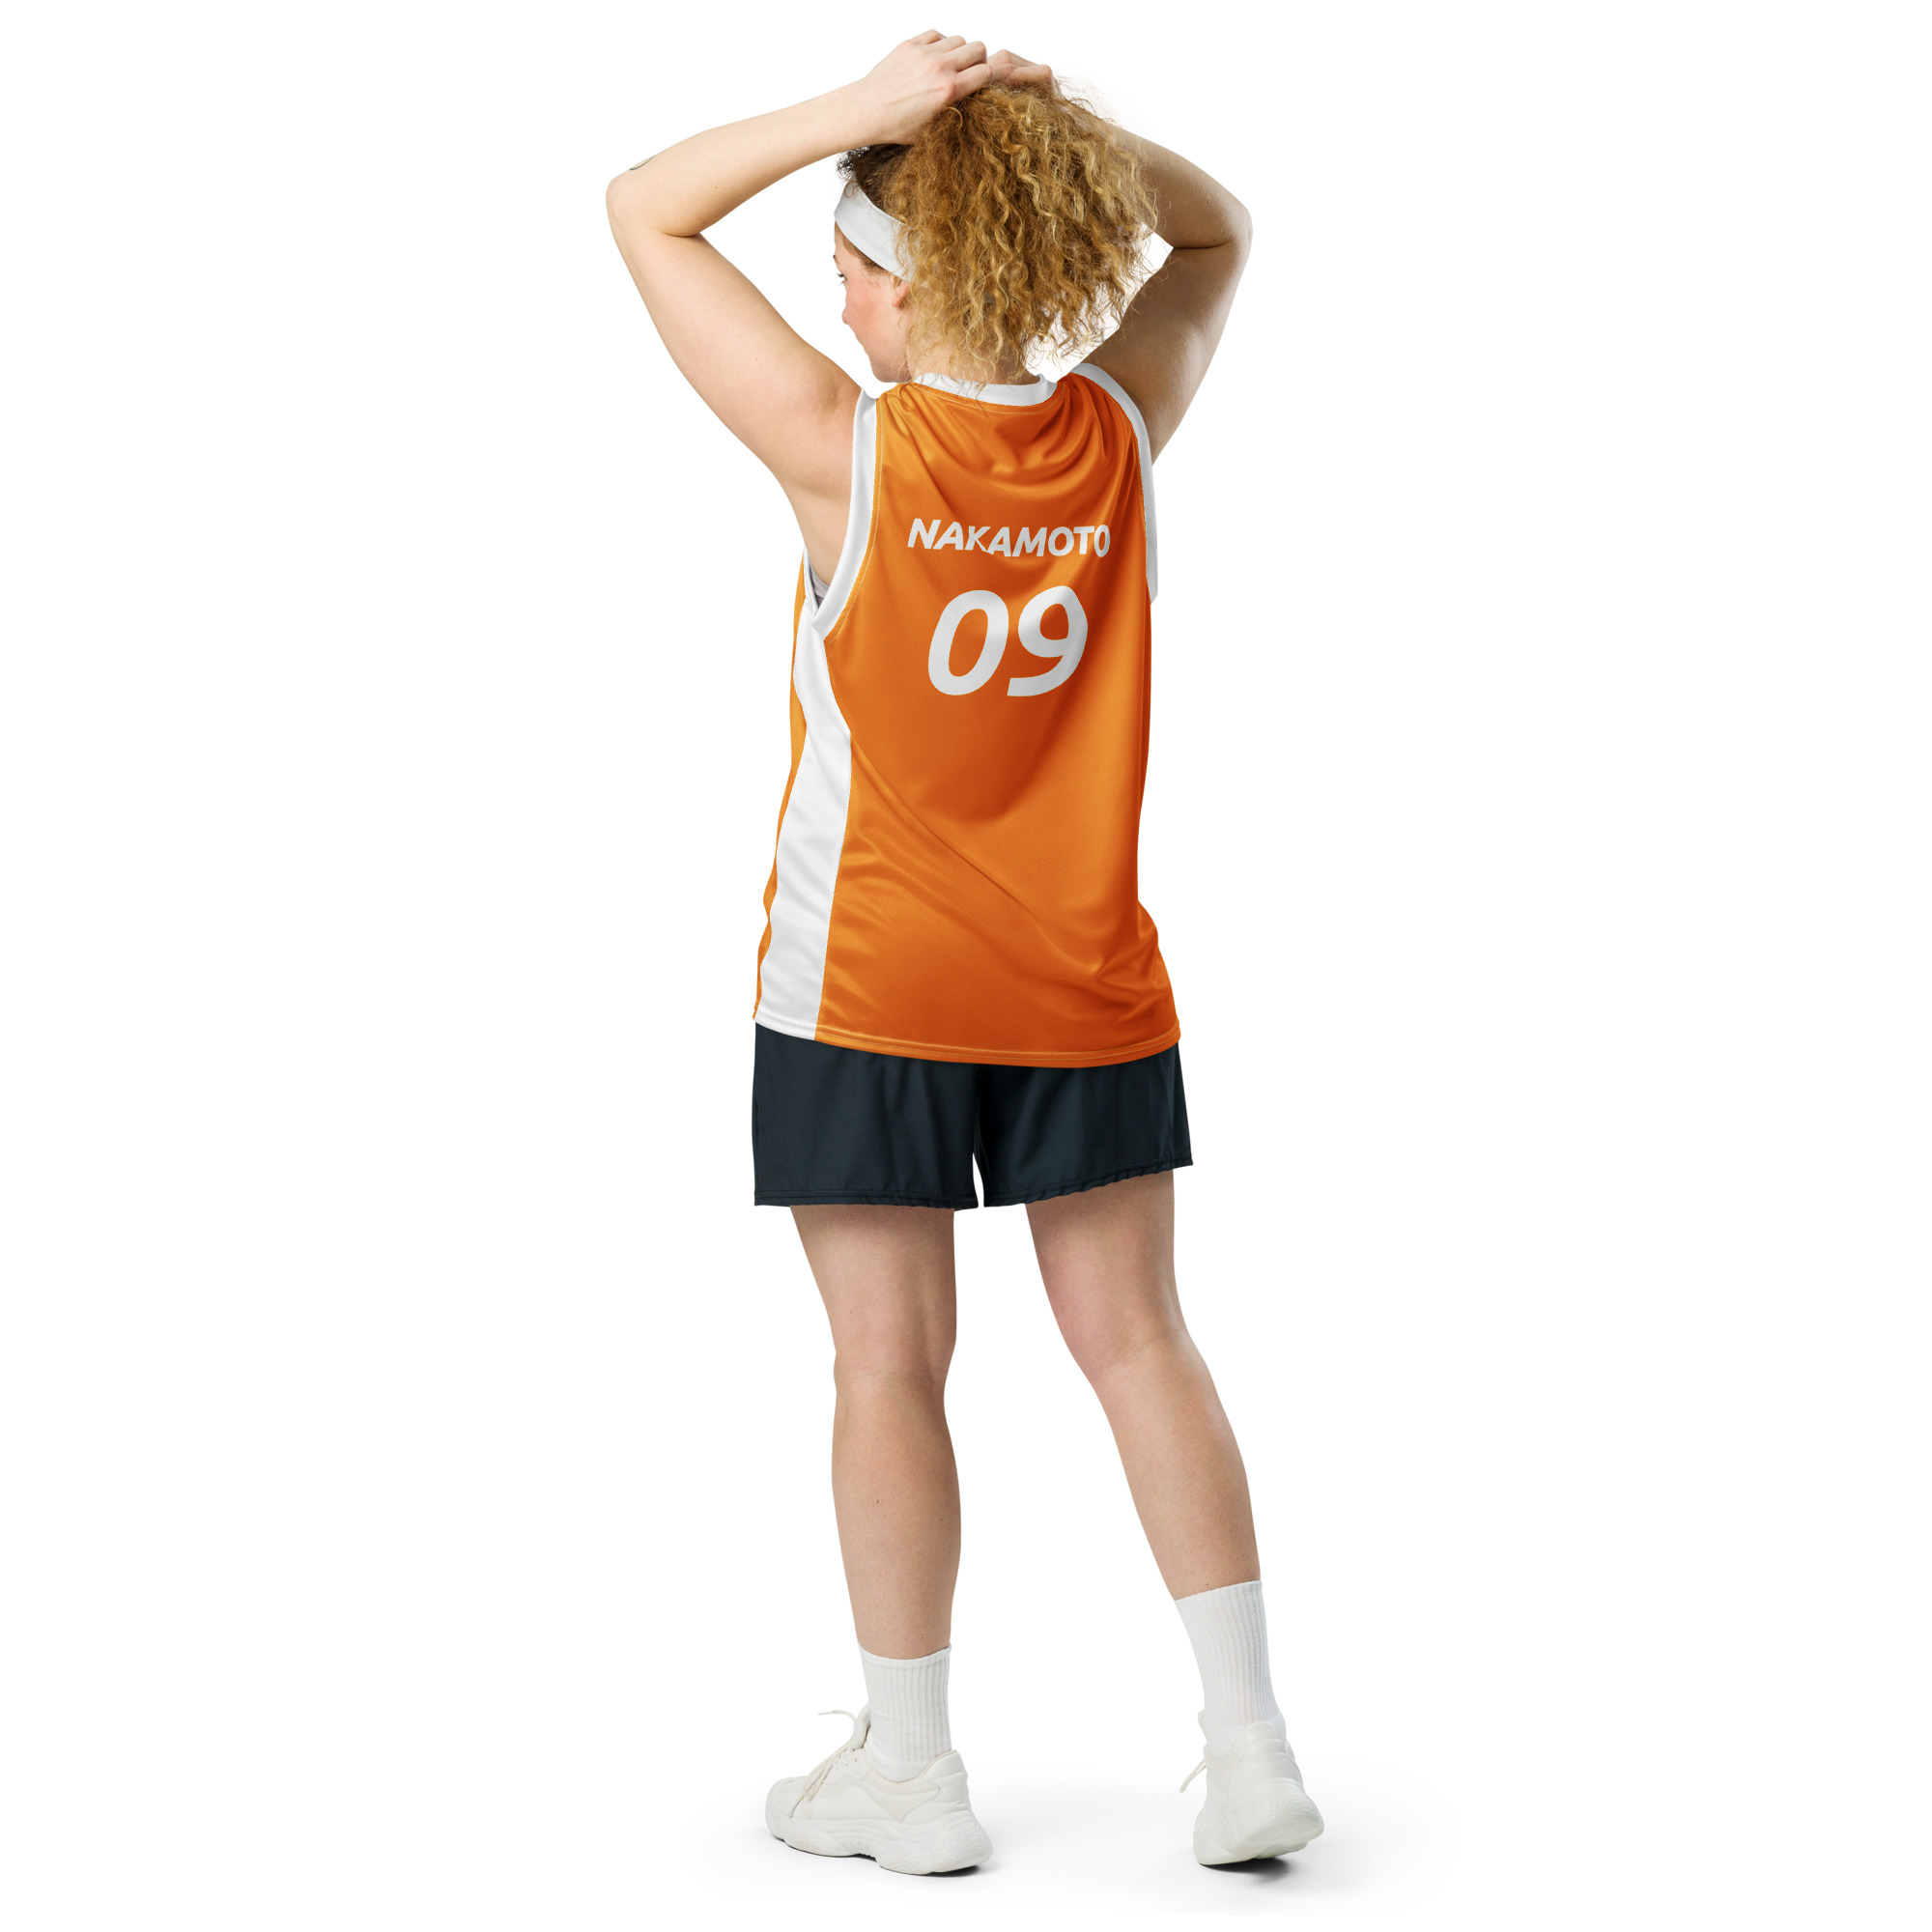 Back side view of a Female wearing the Bitcoin Basketball Jersey with cargo pants. The Jersey features "Nakamoto" across the top and the year 09, the year bitcoin was created in 2009. The lettering is in bitcoin font Ubuntu bold italic.